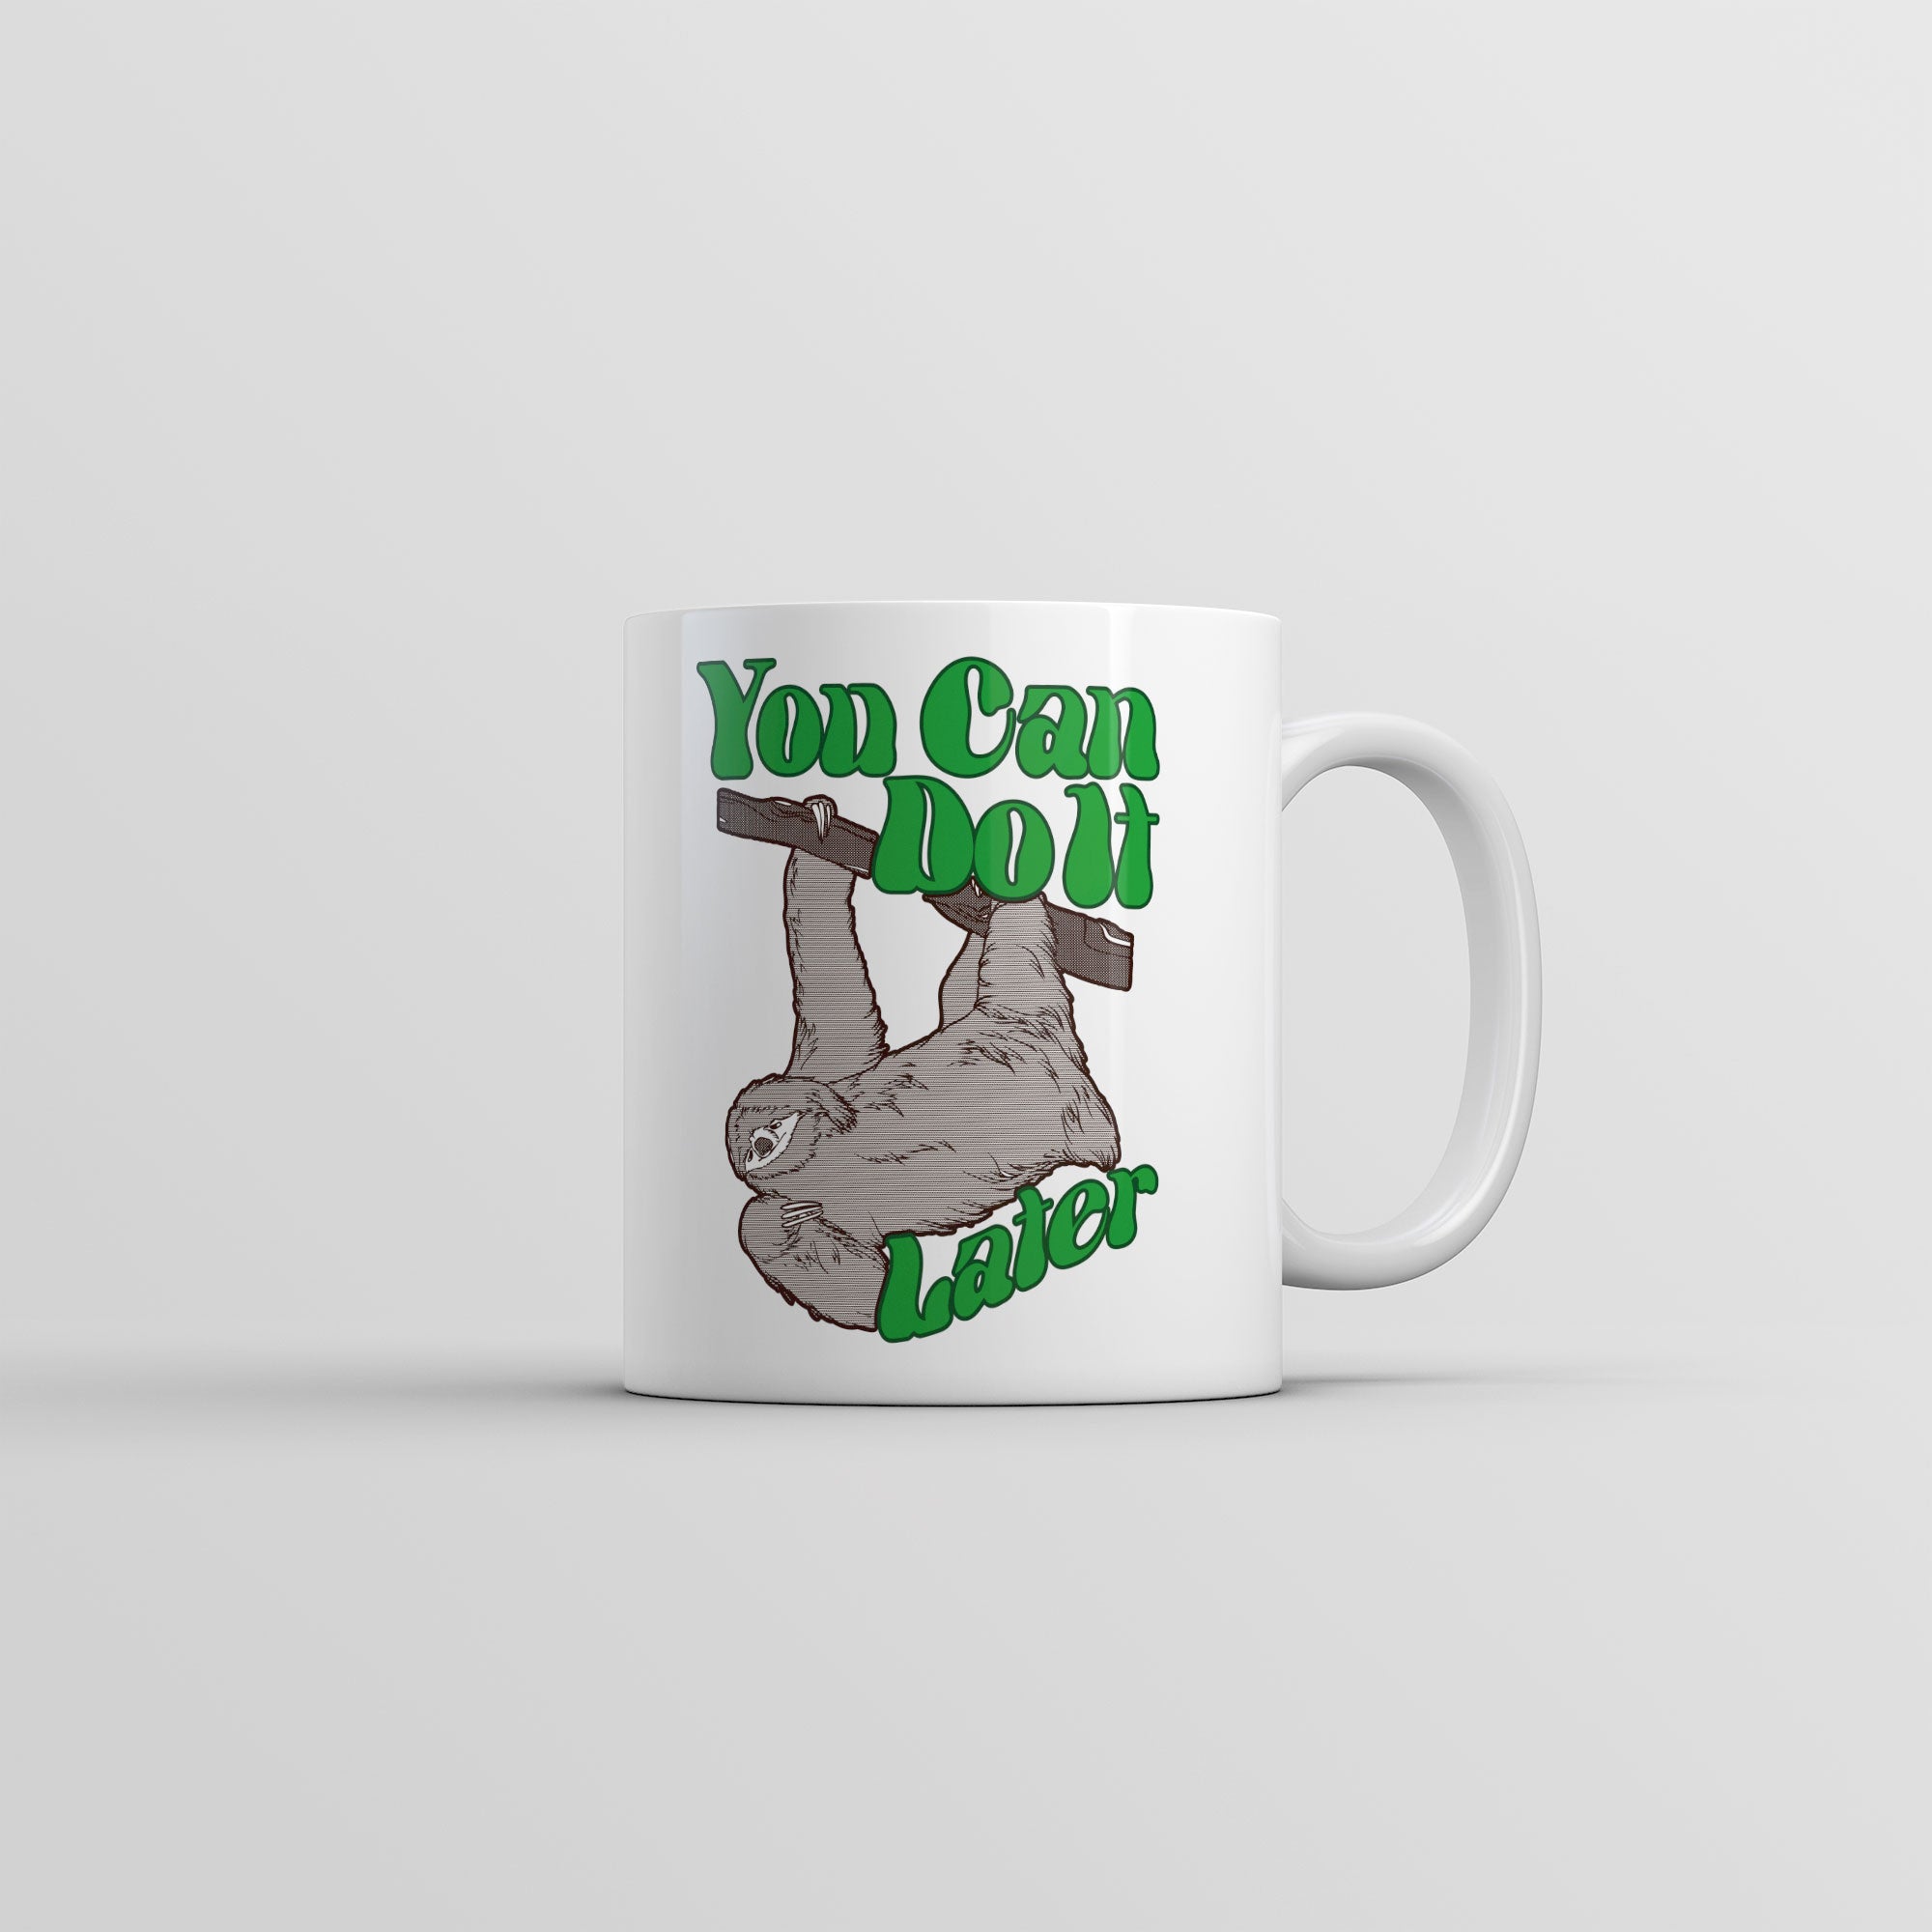 Funny White You Can Do It Later Coffee Mug Nerdy animal sarcastic Tee